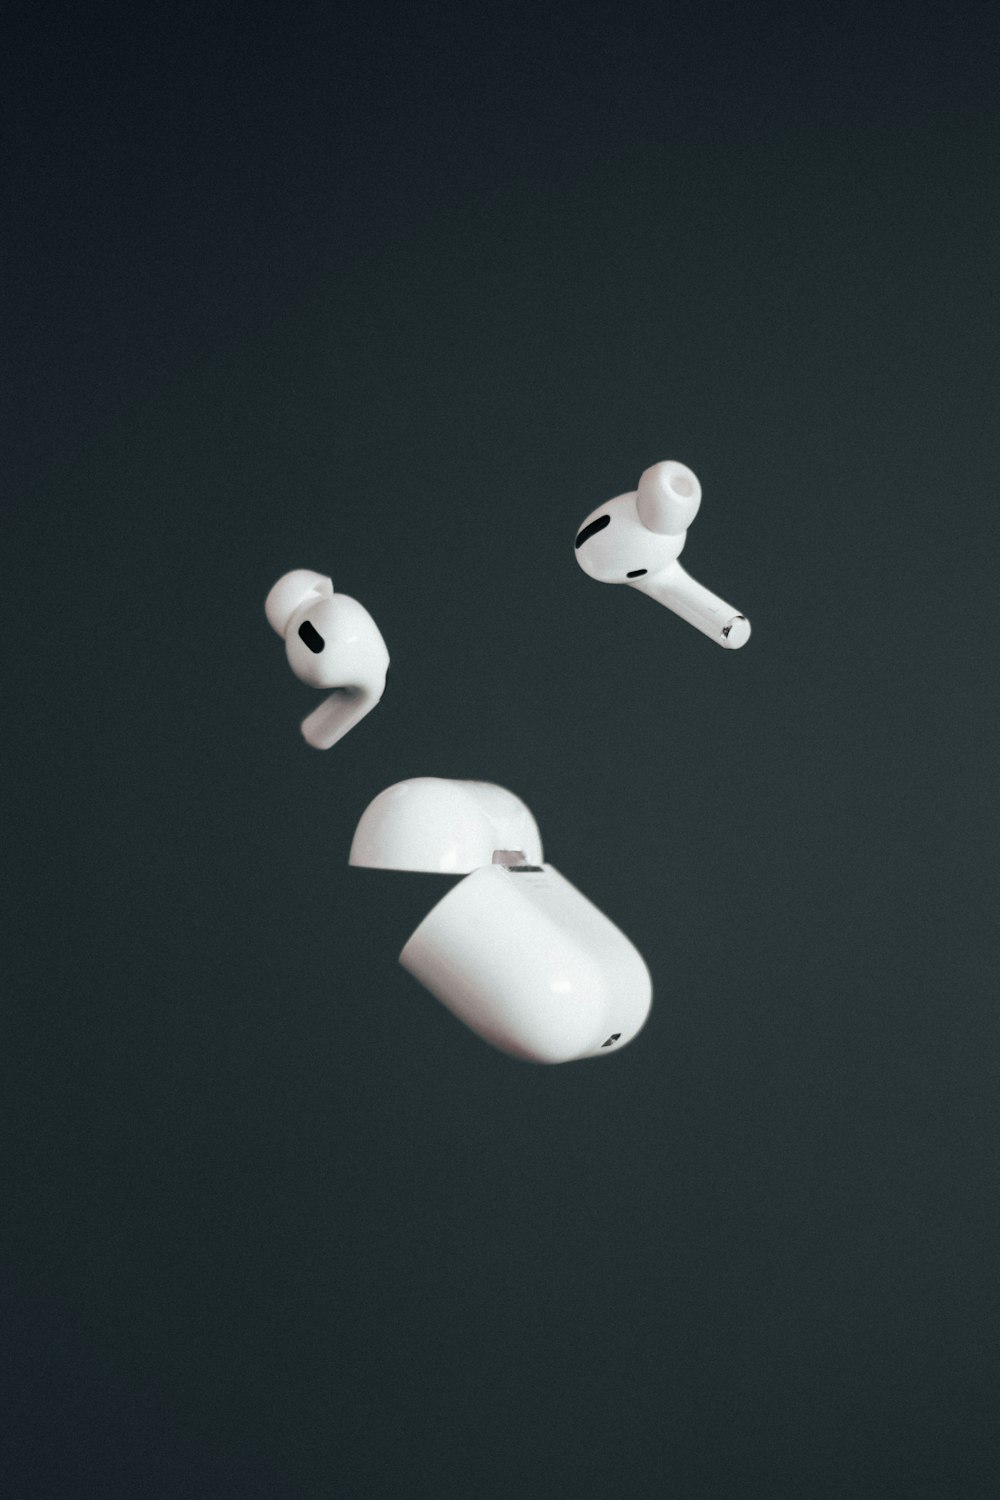 a pair of white ear buds floating in the air